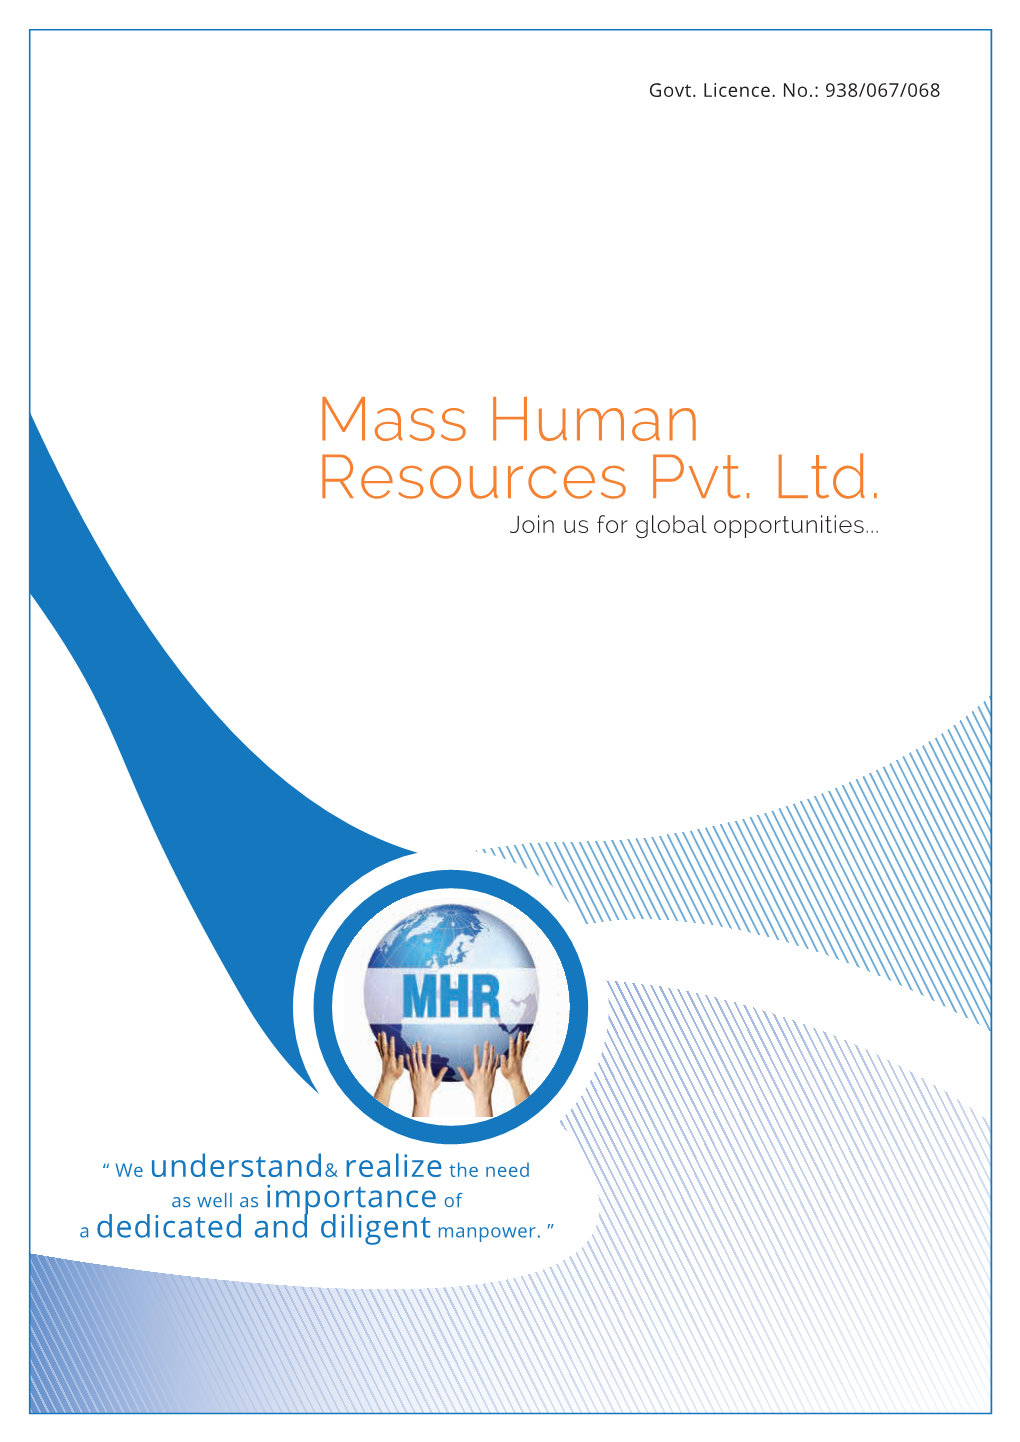 Mass Human Resources Pvt. Ltd. Join Us for Global Opportunities